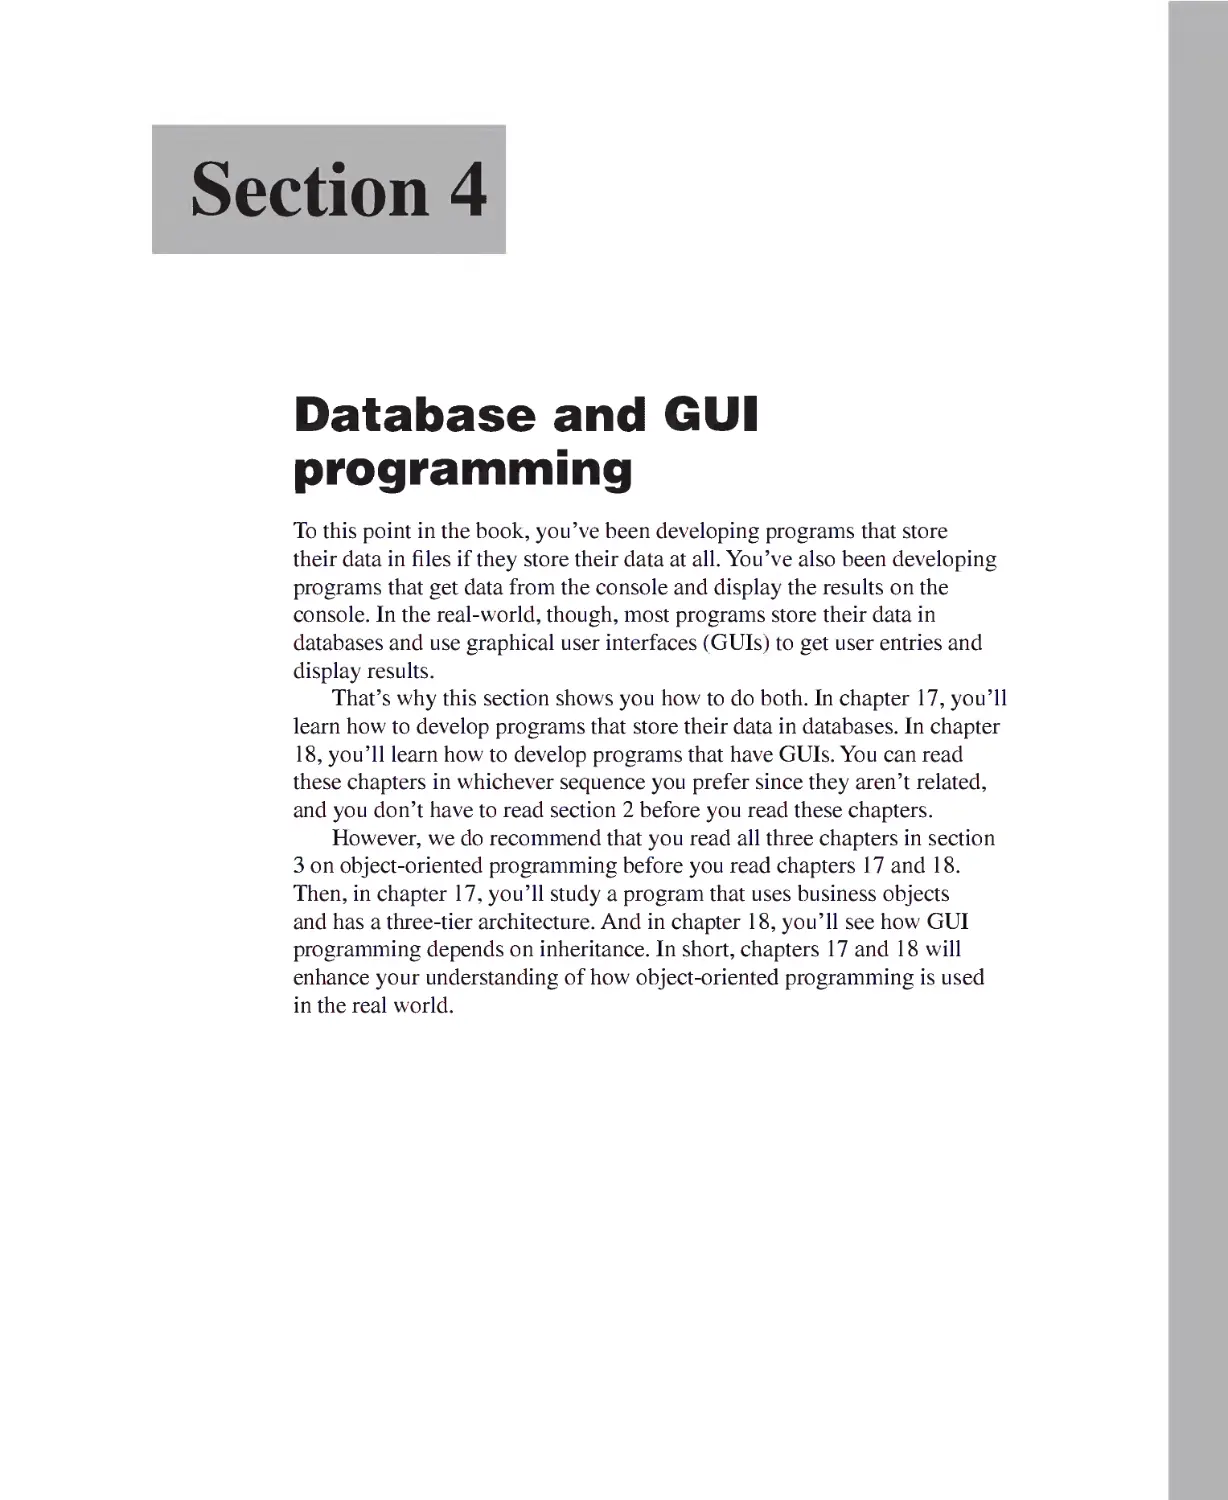 Section 4 - Database and GUI Programming